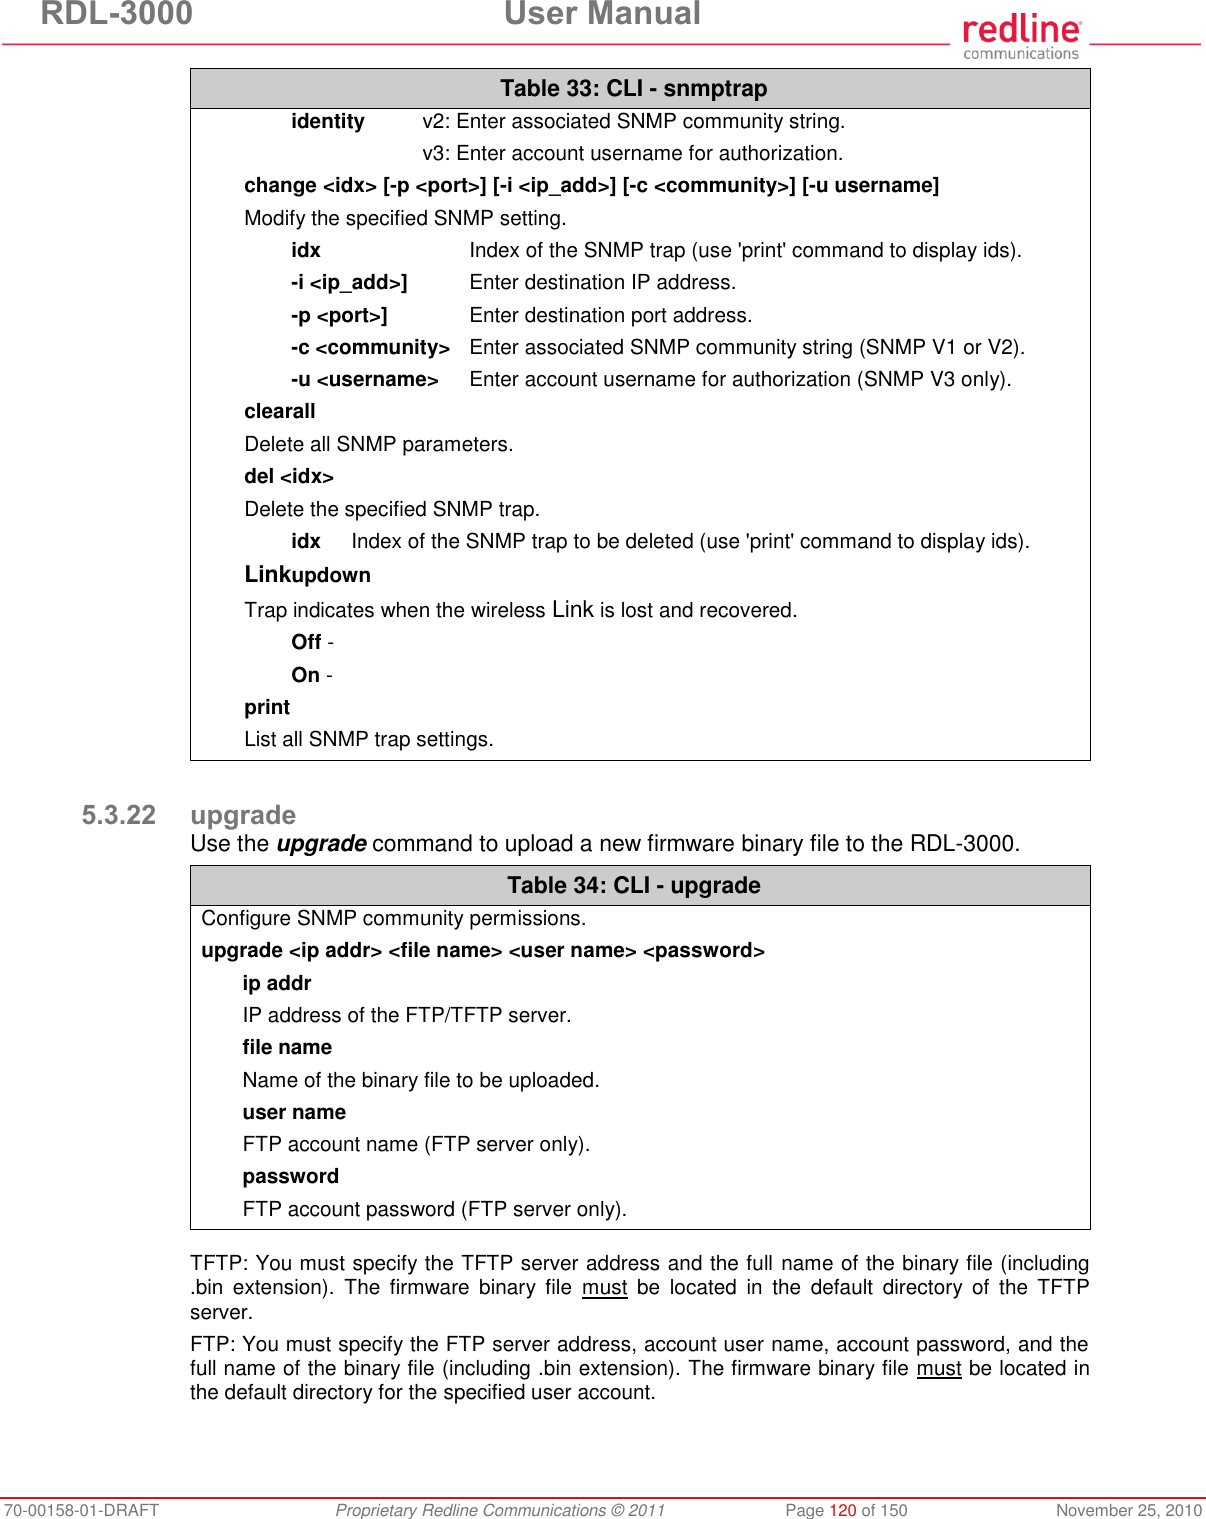 RDL-3000  User Manual 70-00158-01-DRAFT  Proprietary Redline Communications © 2011  Page 120 of 150  November 25, 2010 Table 33: CLI - snmptrap  identity  v2: Enter associated SNMP community string.     v3: Enter account username for authorization. change &lt;idx&gt; [-p &lt;port&gt;] [-i &lt;ip_add&gt;] [-c &lt;community&gt;] [-u username] Modify the specified SNMP setting.  idx  Index of the SNMP trap (use &apos;print&apos; command to display ids).  -i &lt;ip_add&gt;]  Enter destination IP address.  -p &lt;port&gt;]  Enter destination port address.  -c &lt;community&gt;  Enter associated SNMP community string (SNMP V1 or V2).  -u &lt;username&gt;  Enter account username for authorization (SNMP V3 only). clearall Delete all SNMP parameters. del &lt;idx&gt; Delete the specified SNMP trap.   idx  Index of the SNMP trap to be deleted (use &apos;print&apos; command to display ids). Linkupdown Trap indicates when the wireless Link is lost and recovered.  Off -   On -  print List all SNMP trap settings.  5.3.22 upgrade Use the upgrade command to upload a new firmware binary file to the RDL-3000. Table 34: CLI - upgrade Configure SNMP community permissions. upgrade &lt;ip addr&gt; &lt;file name&gt; &lt;user name&gt; &lt;password&gt; ip addr   IP address of the FTP/TFTP server. file name   Name of the binary file to be uploaded. user name   FTP account name (FTP server only). password   FTP account password (FTP server only).   TFTP: You must specify the TFTP server address and the full name of the binary file (including .bin  extension).  The  firmware  binary  file  must  be  located  in  the  default  directory  of  the  TFTP server. FTP: You must specify the FTP server address, account user name, account password, and the full name of the binary file (including .bin extension). The firmware binary file must be located in the default directory for the specified user account.  